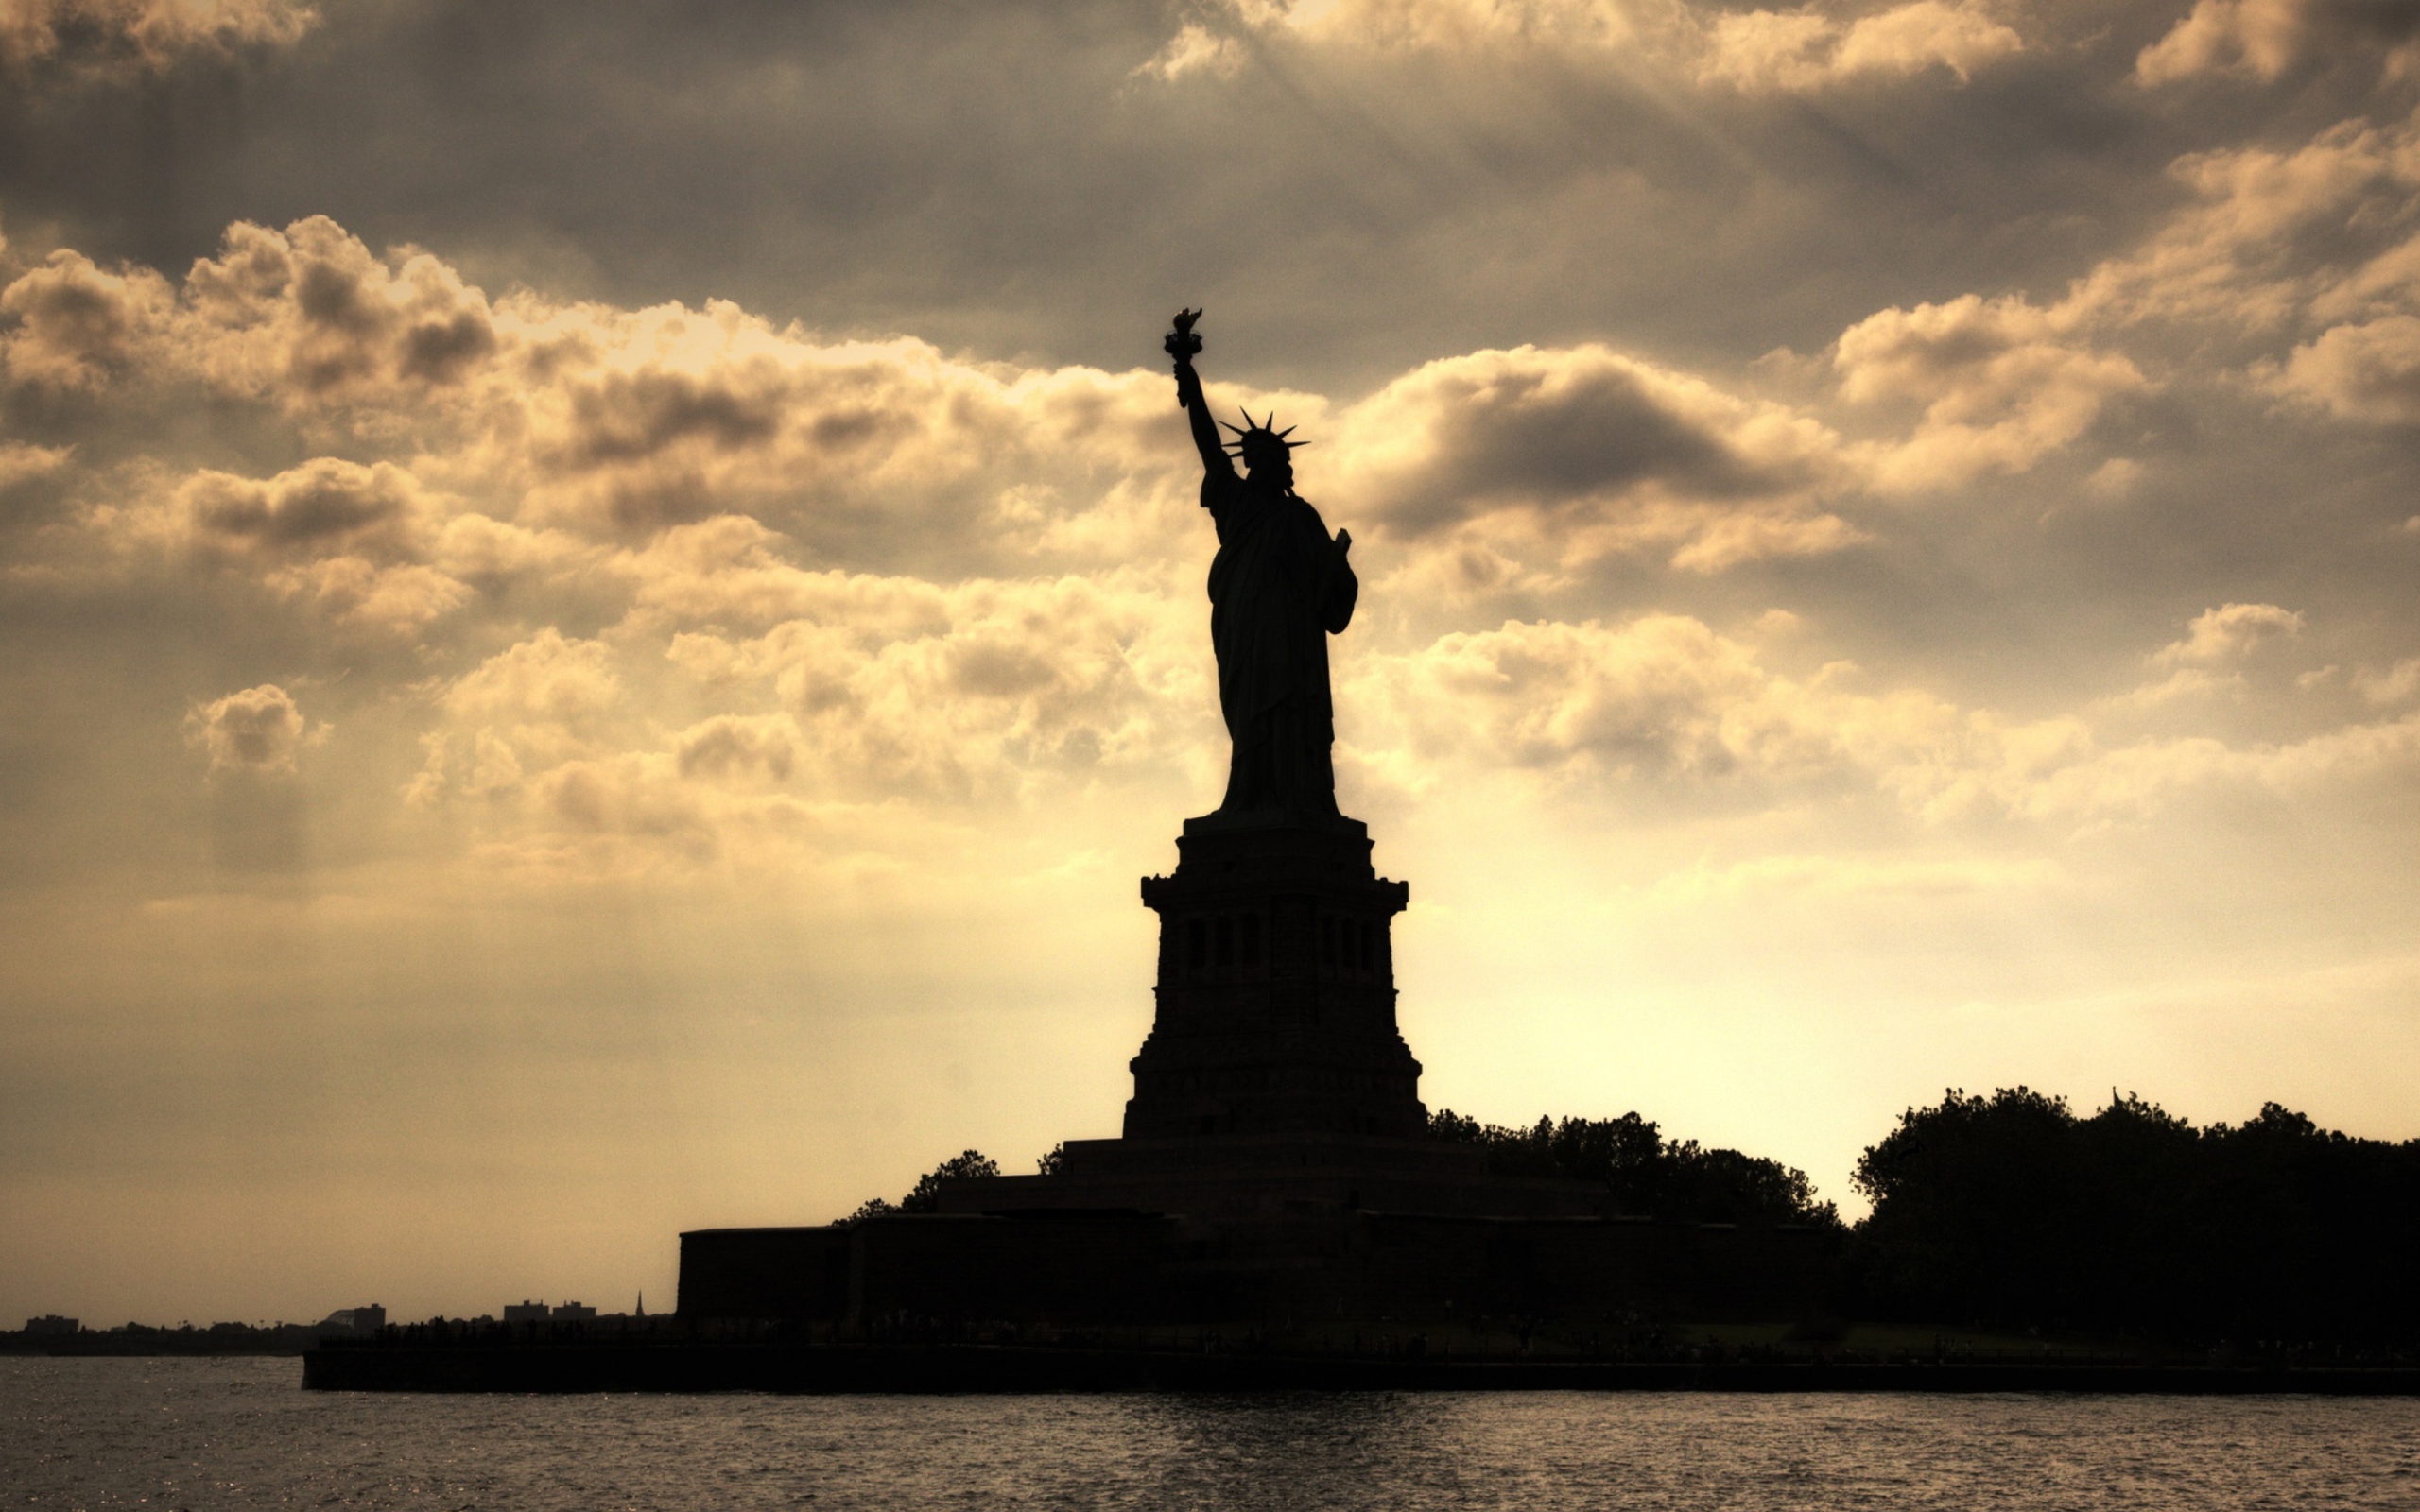 Statue Of Liberty In United States Of America wallpaper 2560x1600